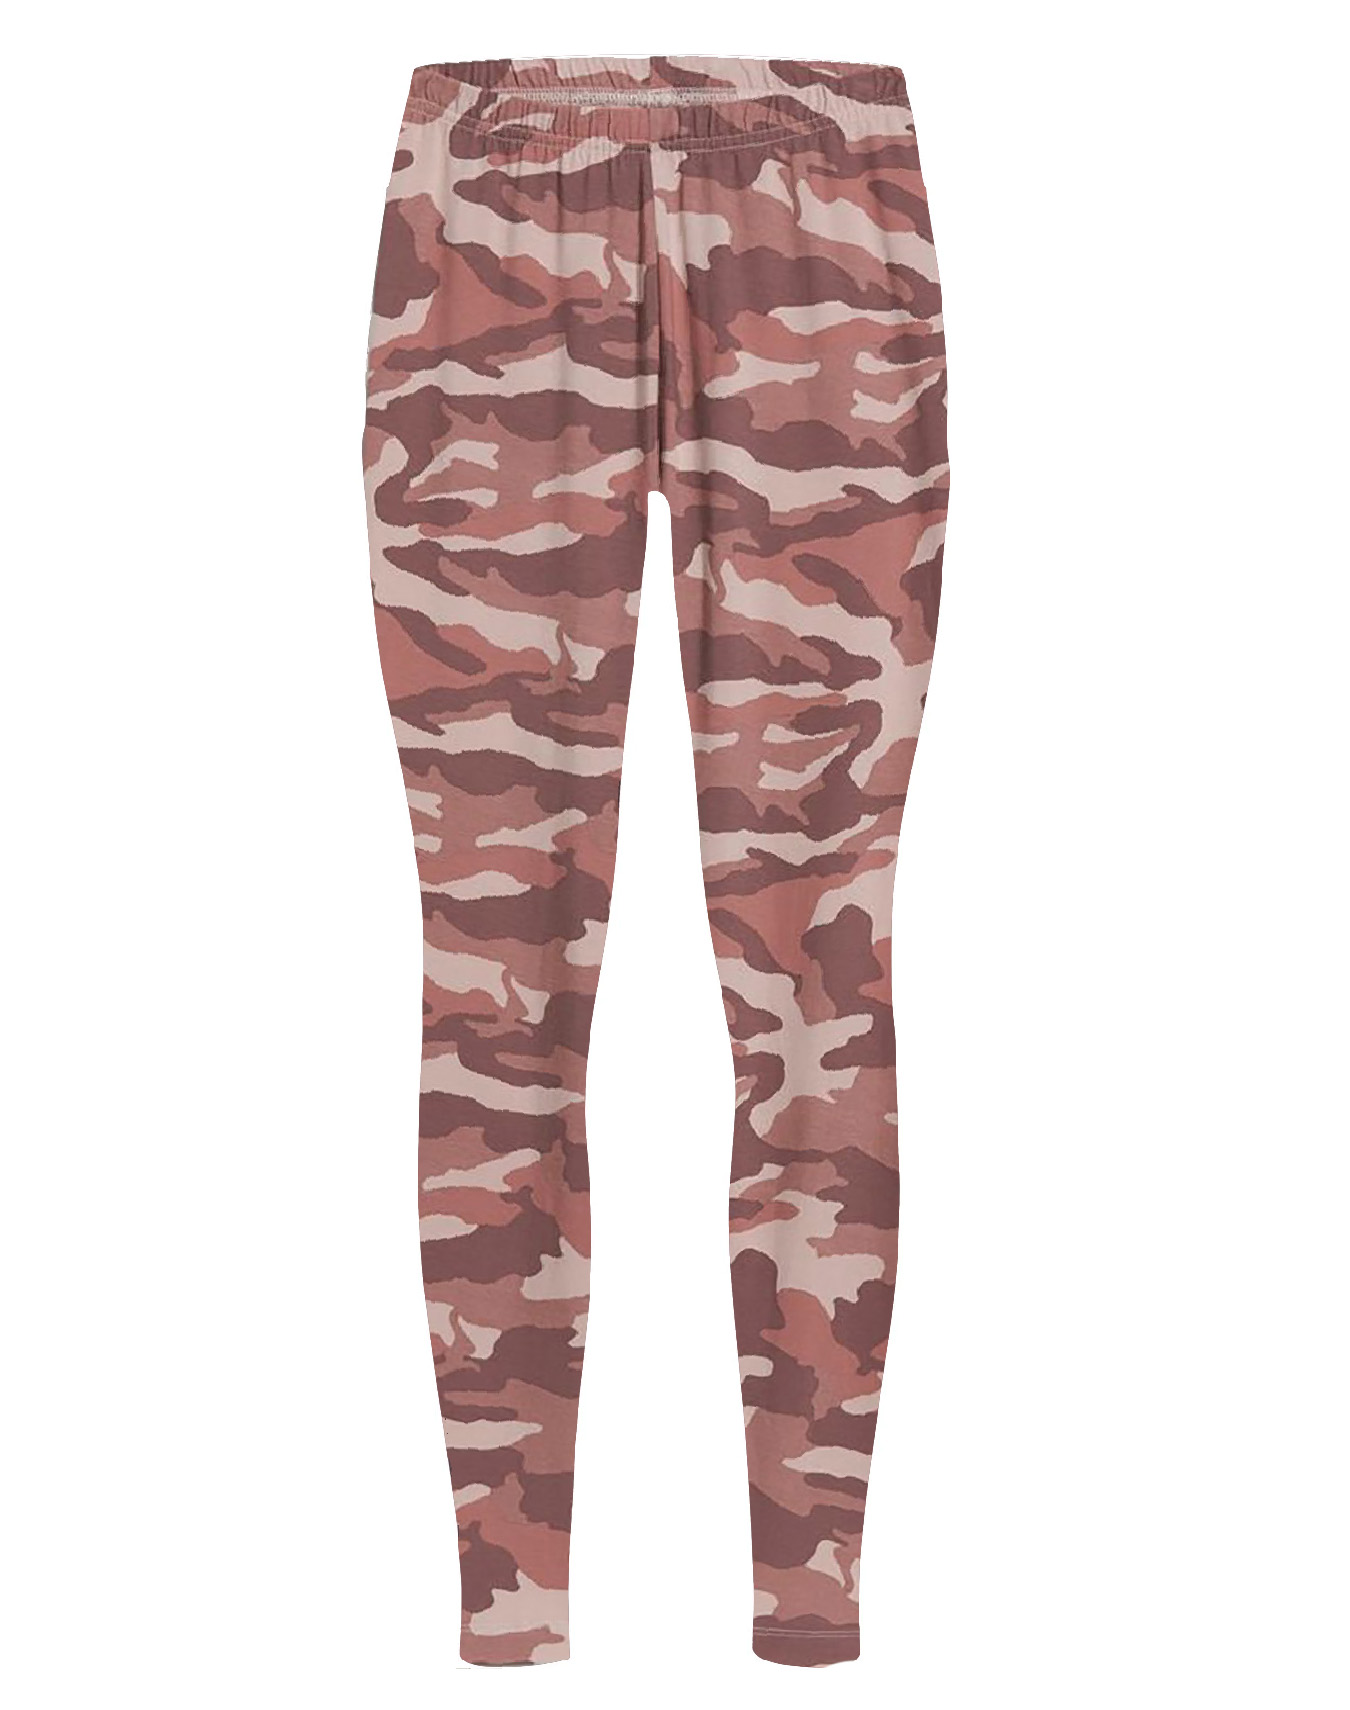 Old Navy - - Old Navy PINK CAMO Print High-Waisted Leggings - Size